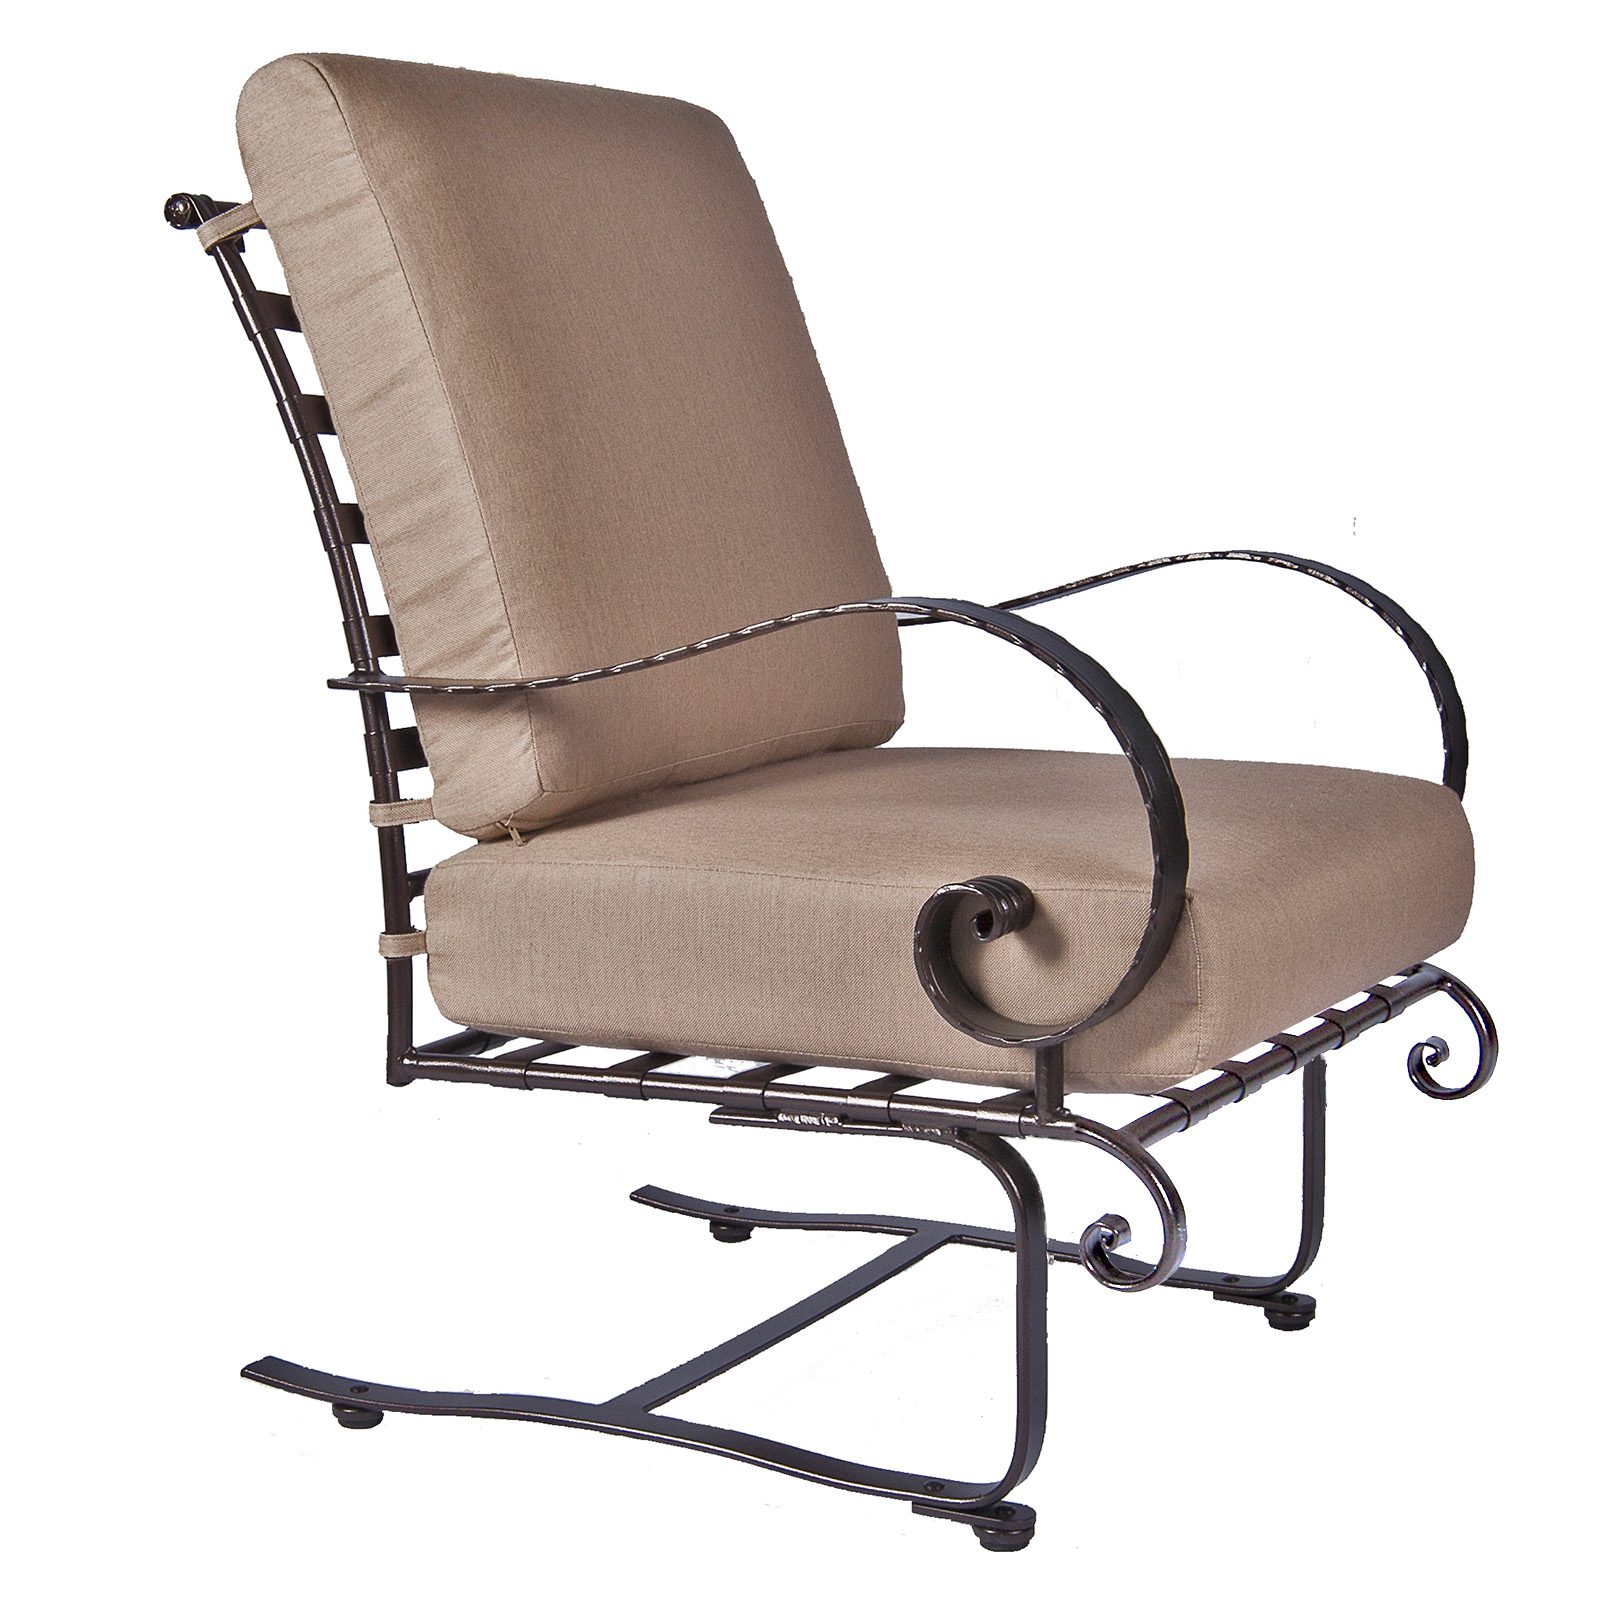 Spring Base Lounge Chair - Wrought Iron & Steel - Classico-W 13